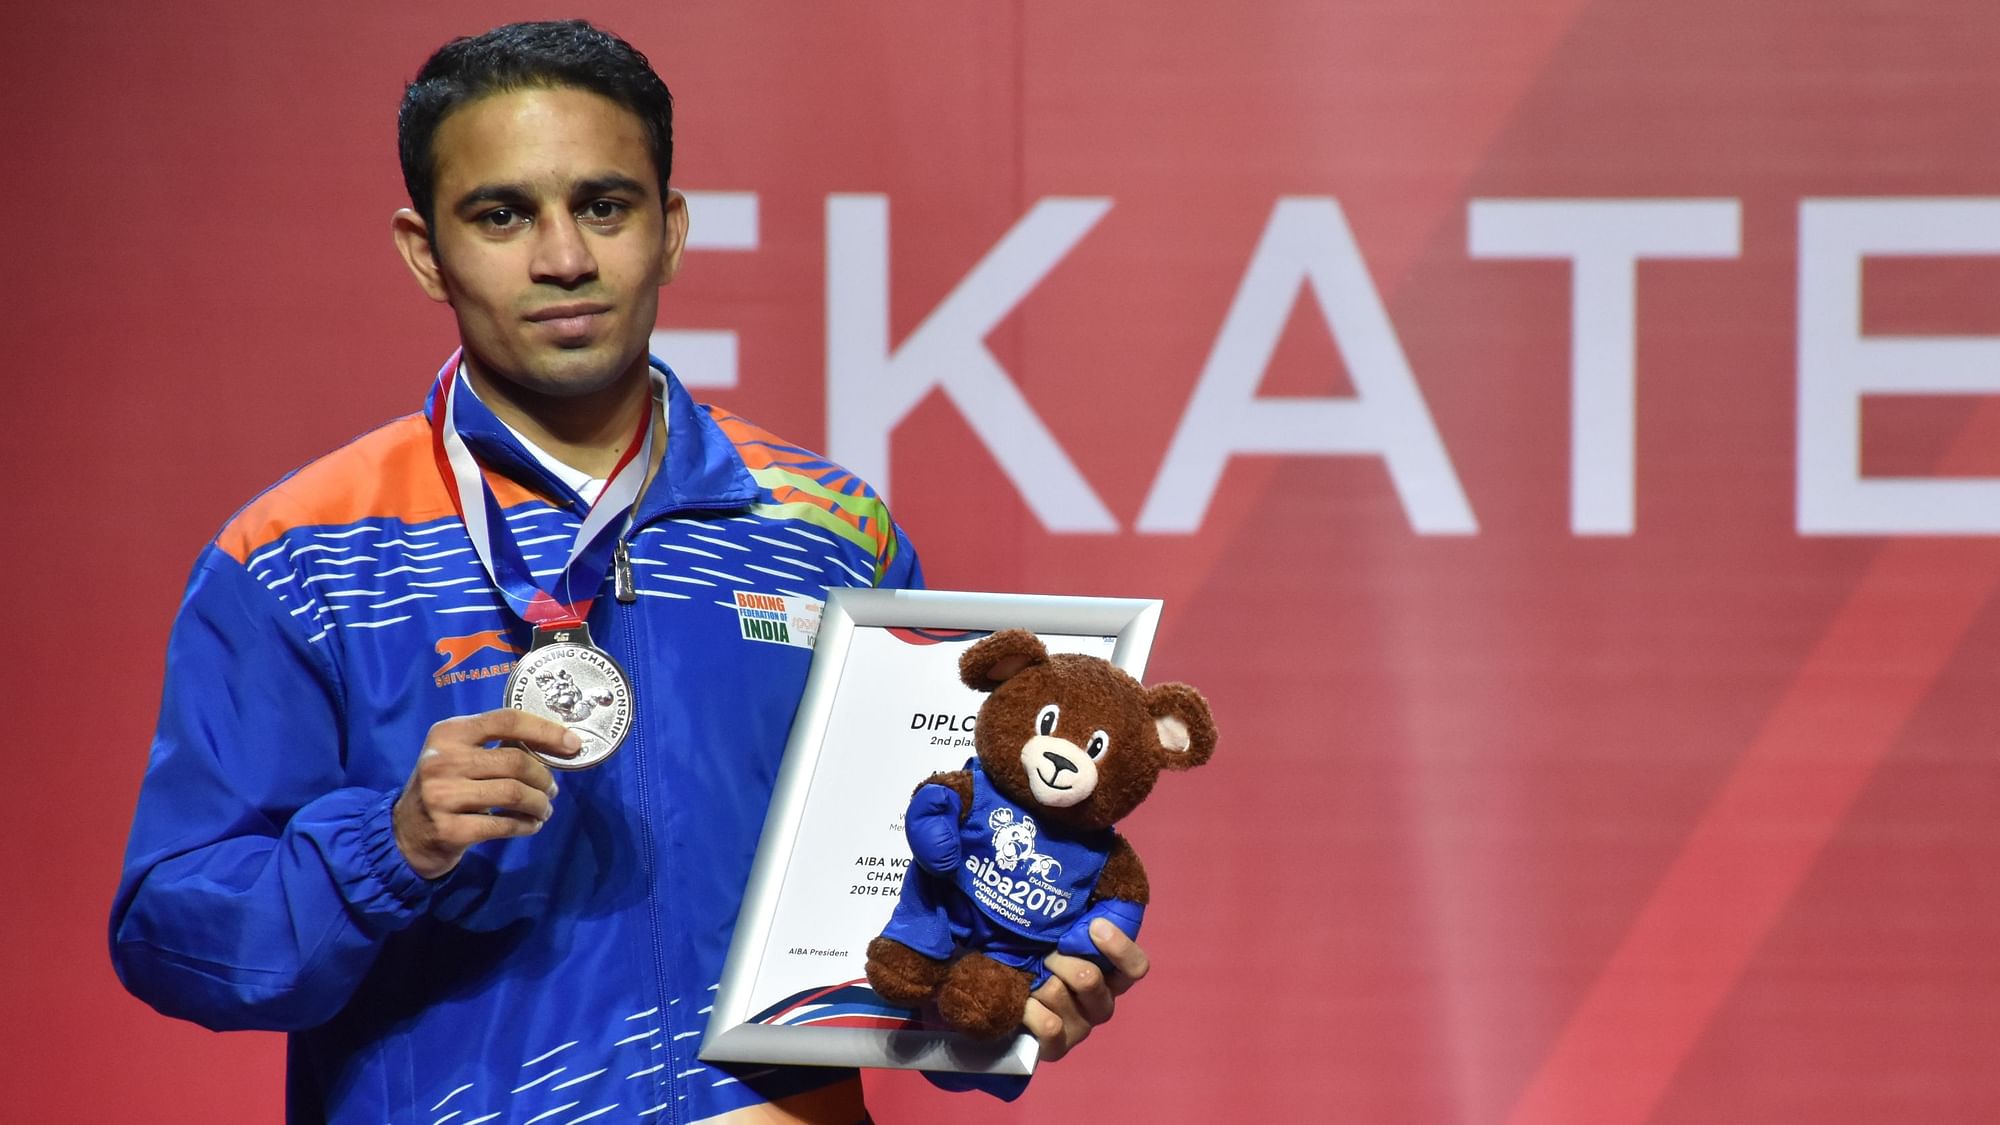 The second-seeded Amit Panghal became the first Indian male boxer to finish second in the world event.